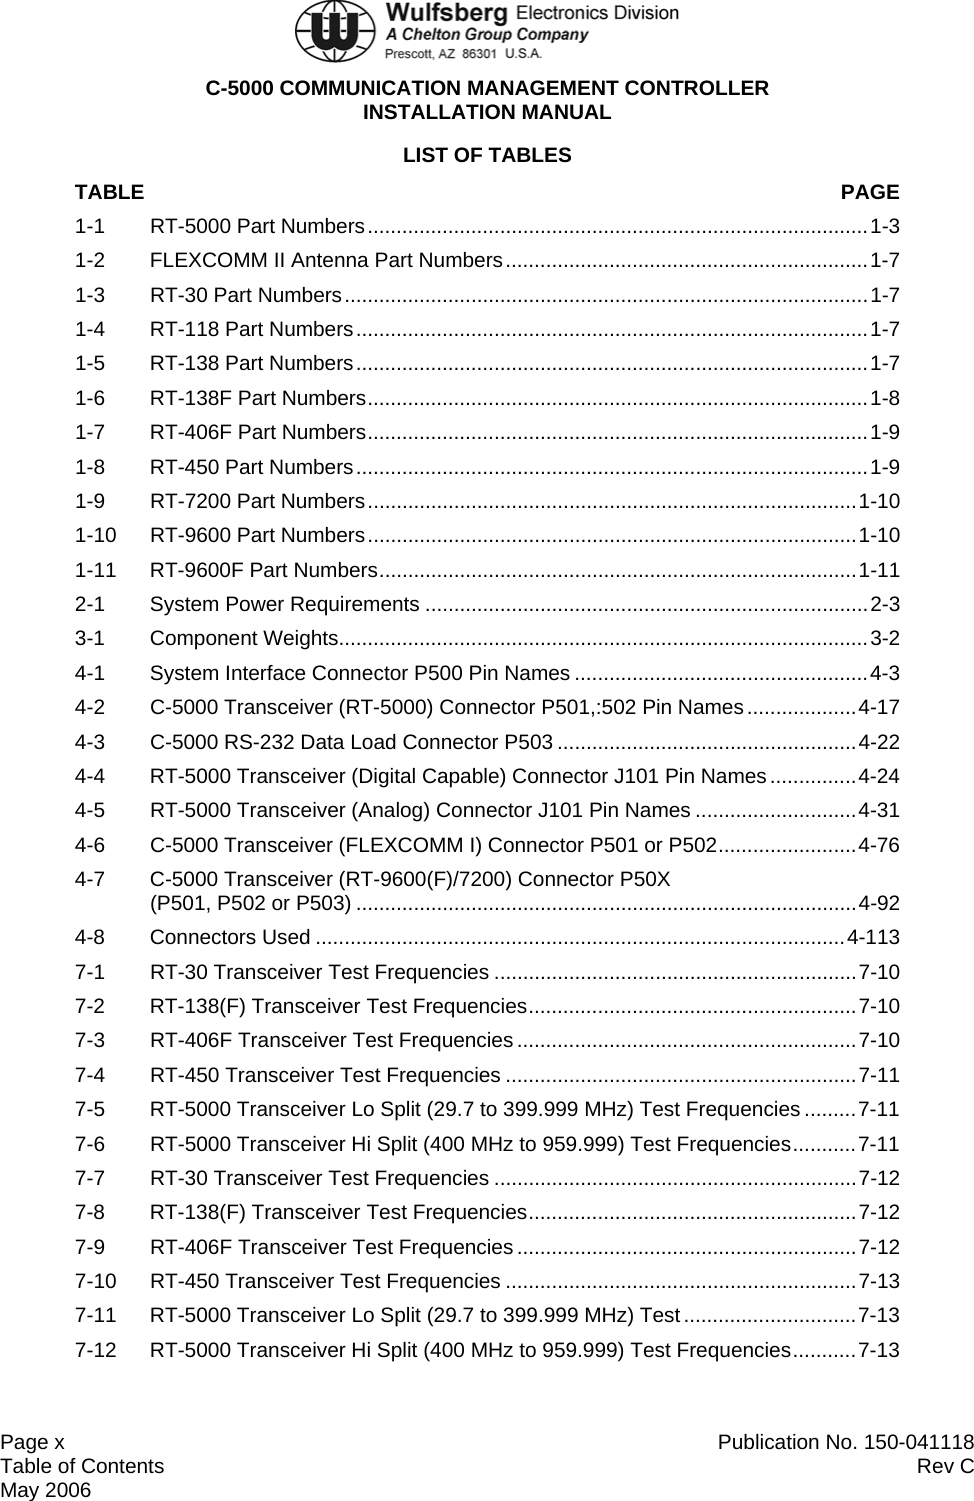  C-5000 COMMUNICATION MANAGEMENT CONTROLLER INSTALLATION MANUAL  Page x  Publication No. 150-041118 Table of Contents  Rev C  May 2006 LIST OF TABLES TABLE  PAGE 1-1 RT-5000 Part Numbers.......................................................................................1-3 1-2  FLEXCOMM II Antenna Part Numbers...............................................................1-7 1-3 RT-30 Part Numbers...........................................................................................1-7 1-4 RT-118 Part Numbers.........................................................................................1-7 1-5 RT-138 Part Numbers.........................................................................................1-7 1-6 RT-138F Part Numbers.......................................................................................1-8 1-7 RT-406F Part Numbers.......................................................................................1-9 1-8 RT-450 Part Numbers.........................................................................................1-9 1-9 RT-7200 Part Numbers.....................................................................................1-10 1-10 RT-9600 Part Numbers.....................................................................................1-10 1-11 RT-9600F Part Numbers...................................................................................1-11 2-1 System Power Requirements .............................................................................2-3 3-1 Component Weights............................................................................................3-2 4-1 System Interface Connector P500 Pin Names ...................................................4-3 4-2  C-5000 Transceiver (RT-5000) Connector P501,:502 Pin Names...................4-17 4-3  C-5000 RS-232 Data Load Connector P503 ....................................................4-22 4-4  RT-5000 Transceiver (Digital Capable) Connector J101 Pin Names...............4-24 4-5 RT-5000 Transceiver (Analog) Connector J101 Pin Names ............................4-31 4-6 C-5000 Transceiver (FLEXCOMM I) Connector P501 or P502........................4-76 4-7  C-5000 Transceiver (RT-9600(F)/7200) Connector P50X  (P501, P502 or P503) .......................................................................................4-92 4-8 Connectors Used ............................................................................................4-113 7-1 RT-30 Transceiver Test Frequencies ...............................................................7-10 7-2 RT-138(F) Transceiver Test Frequencies.........................................................7-10 7-3 RT-406F Transceiver Test Frequencies...........................................................7-10 7-4 RT-450 Transceiver Test Frequencies .............................................................7-11 7-5  RT-5000 Transceiver Lo Split (29.7 to 399.999 MHz) Test Frequencies .........7-11 7-6  RT-5000 Transceiver Hi Split (400 MHz to 959.999) Test Frequencies...........7-11 7-7 RT-30 Transceiver Test Frequencies ...............................................................7-12 7-8 RT-138(F) Transceiver Test Frequencies.........................................................7-12 7-9 RT-406F Transceiver Test Frequencies...........................................................7-12 7-10 RT-450 Transceiver Test Frequencies .............................................................7-13 7-11  RT-5000 Transceiver Lo Split (29.7 to 399.999 MHz) Test ..............................7-13 7-12  RT-5000 Transceiver Hi Split (400 MHz to 959.999) Test Frequencies...........7-13  